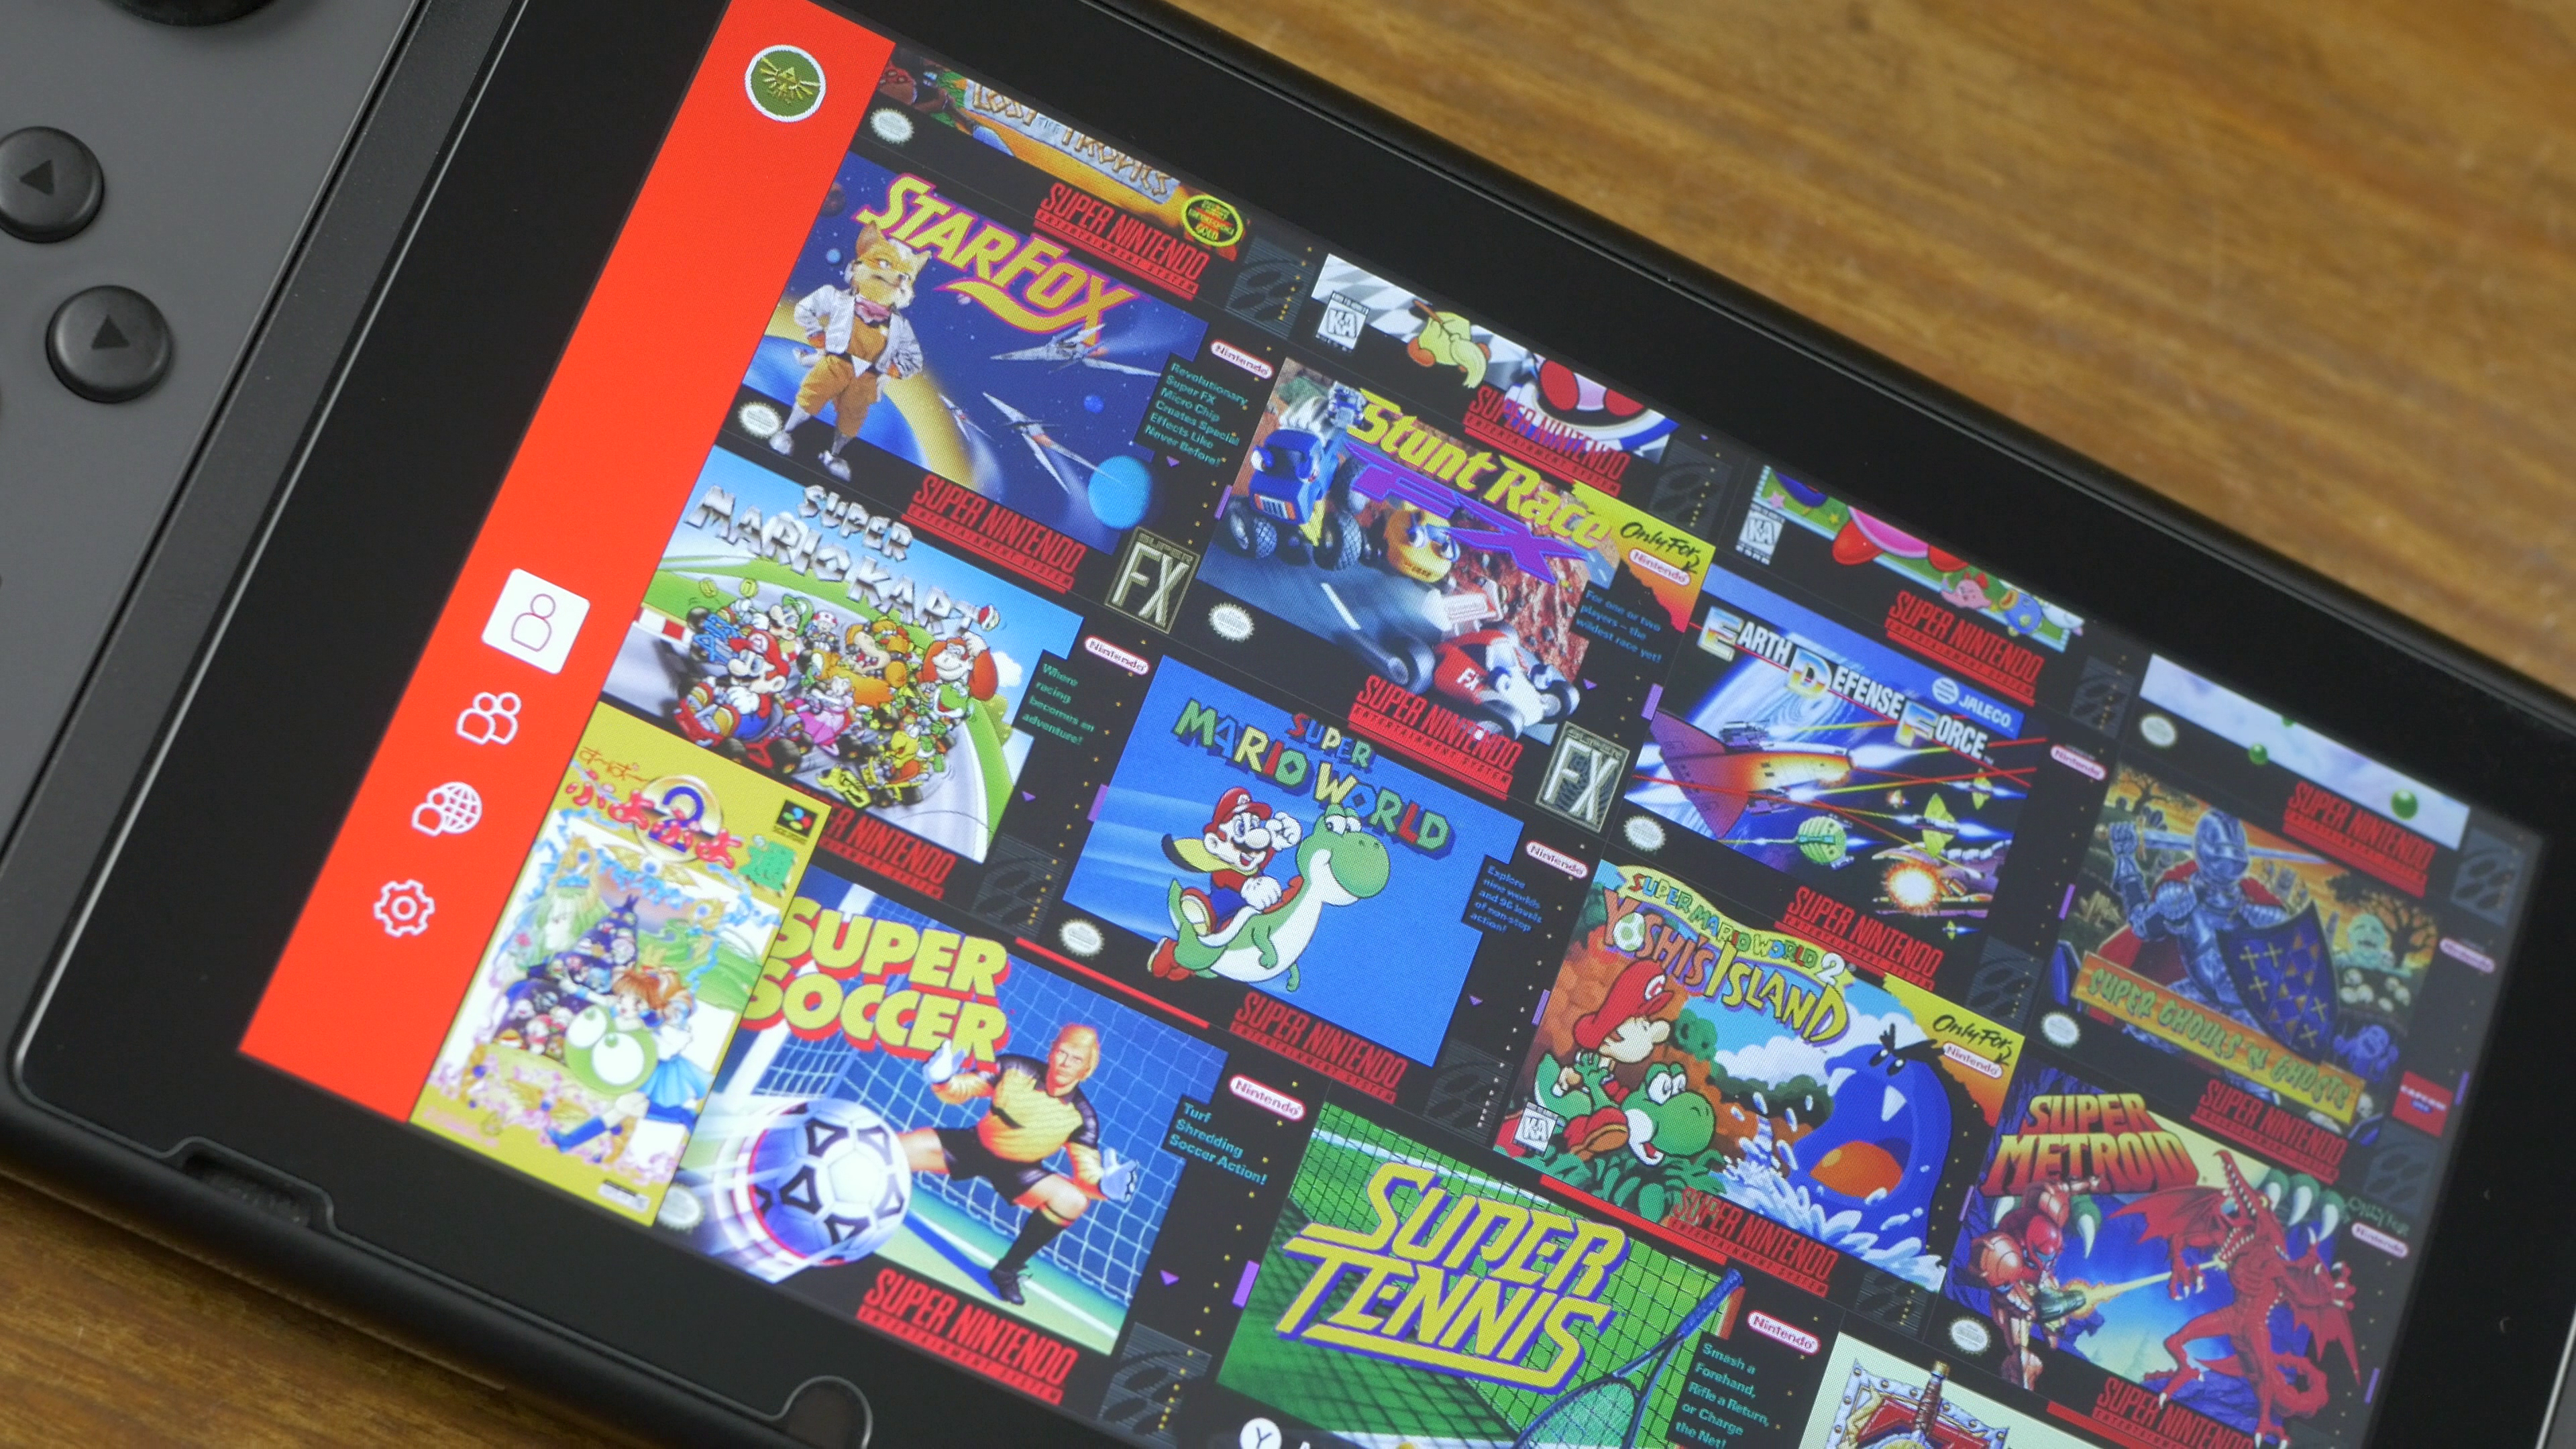 Here's Why SNES VC Games Can Only be Played on a New 3DS